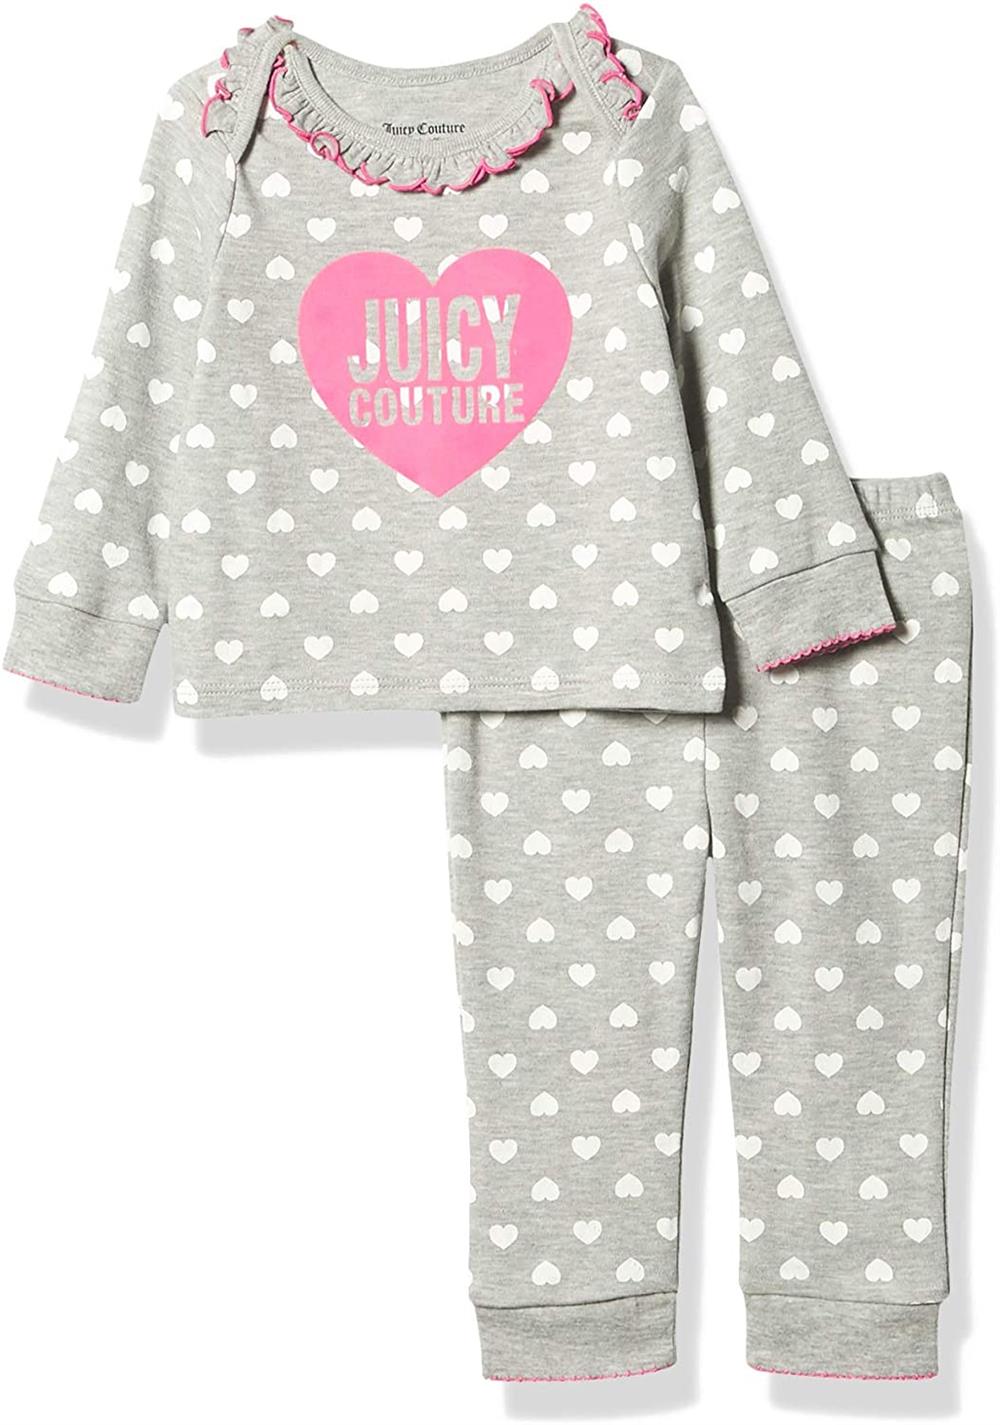 Juicy Couture Girls 12-24 Months Heart Ruffle Pant Set